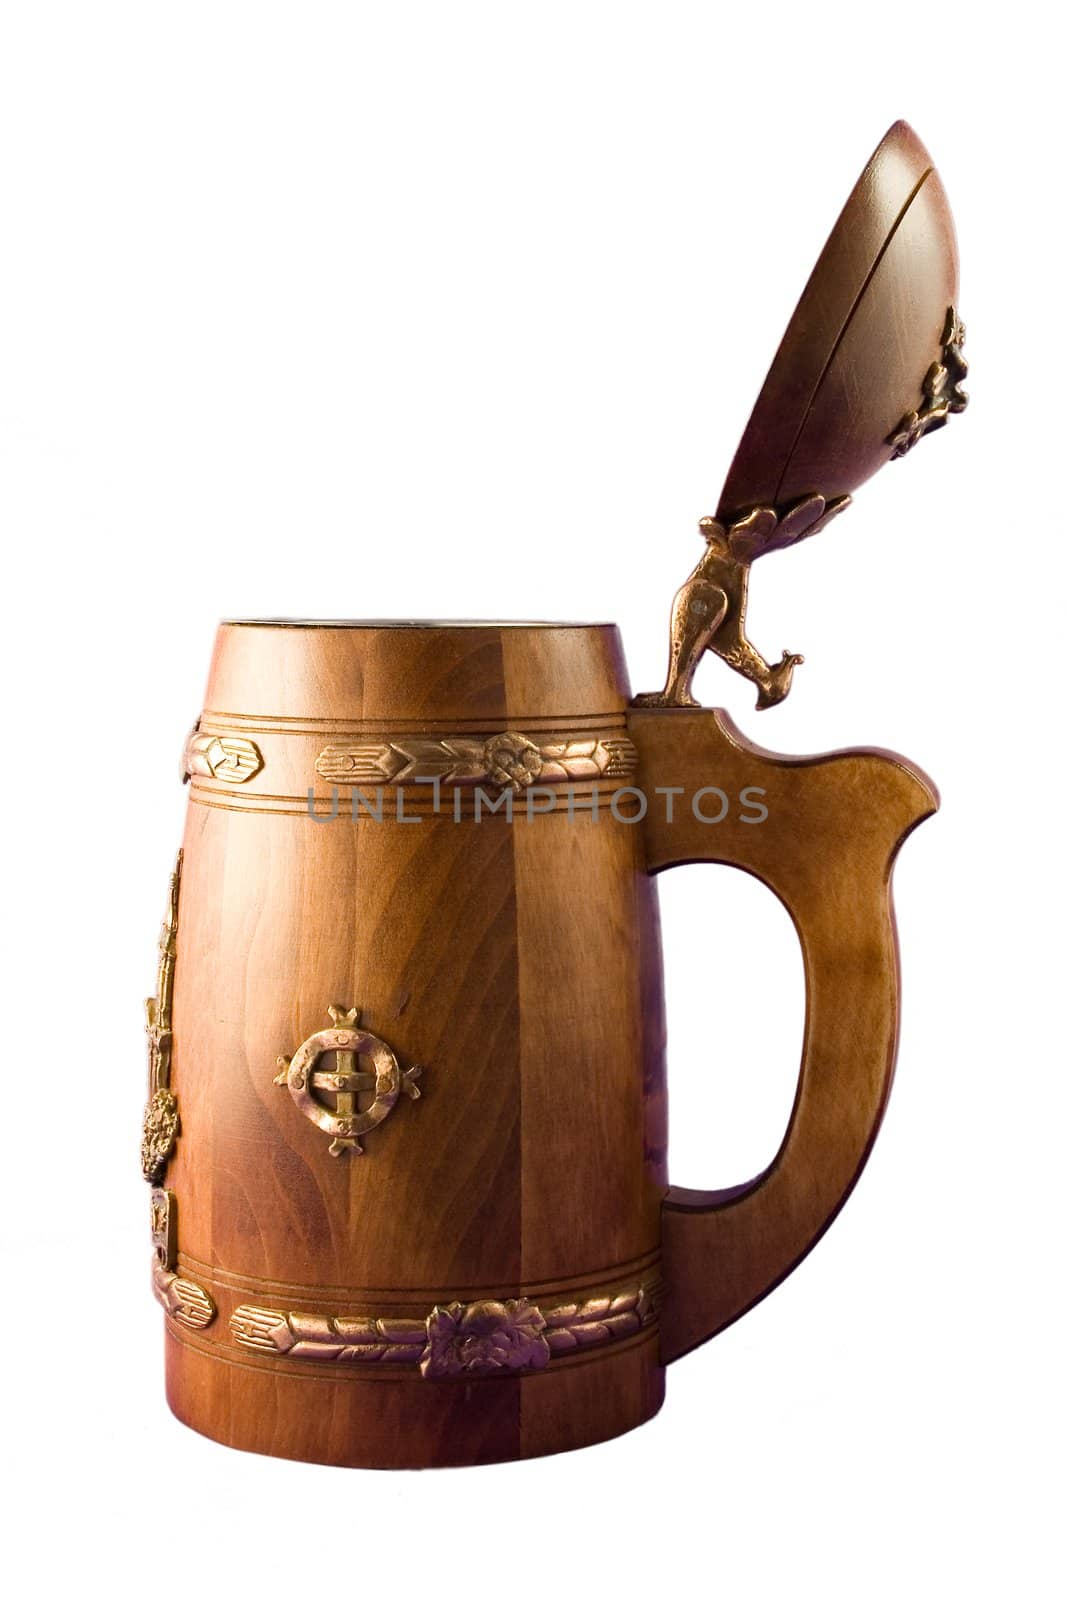 Souvenir wooden beer mug on a white background. Isolated object